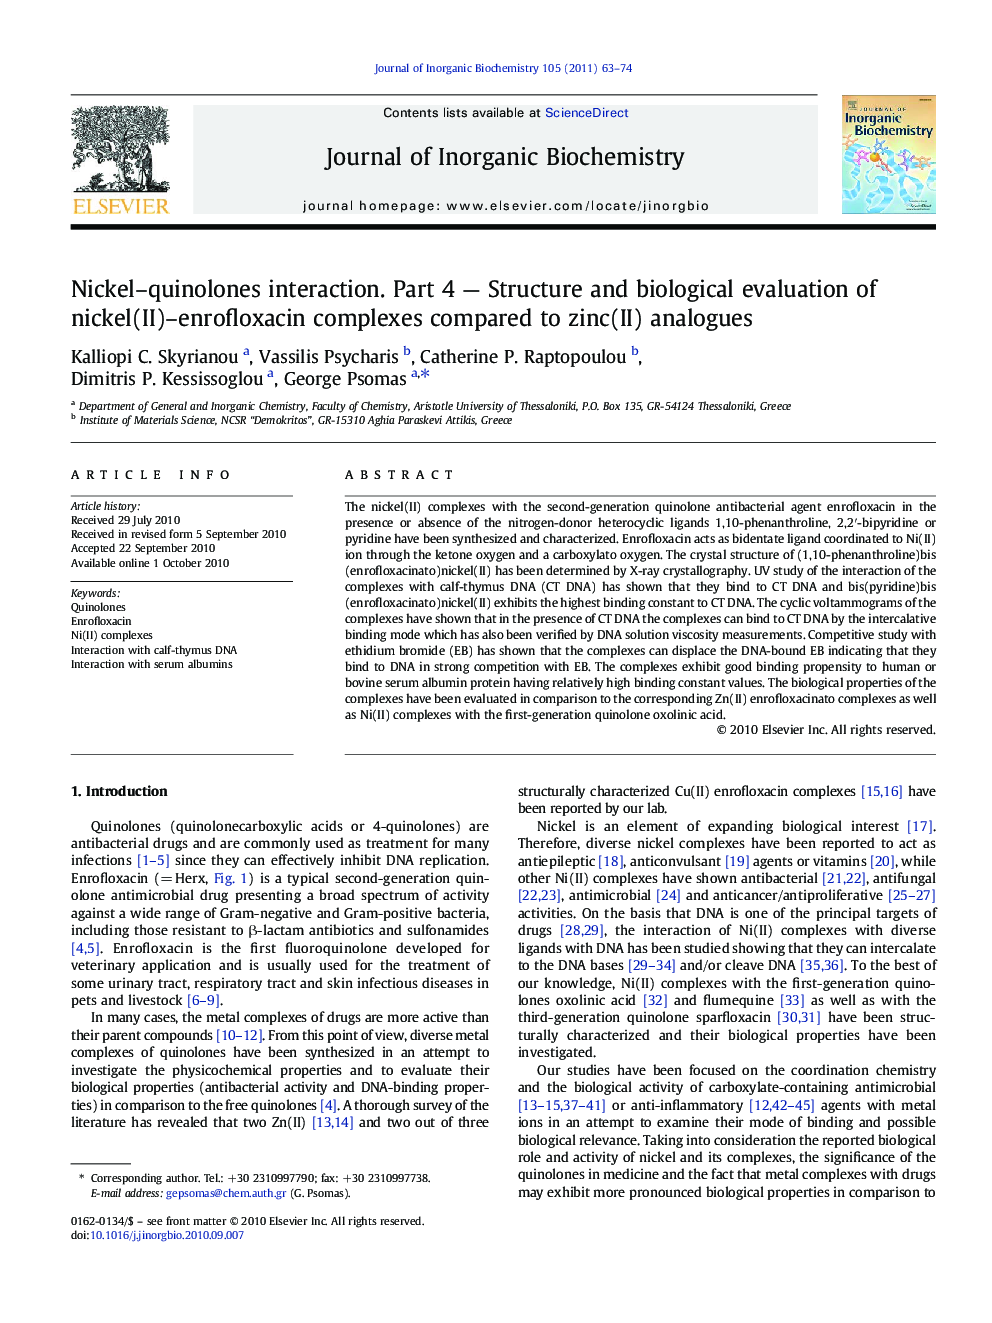 Nickel–quinolones interaction. Part 4 — Structure and biological evaluation of nickel(II)–enrofloxacin complexes compared to zinc(II) analogues